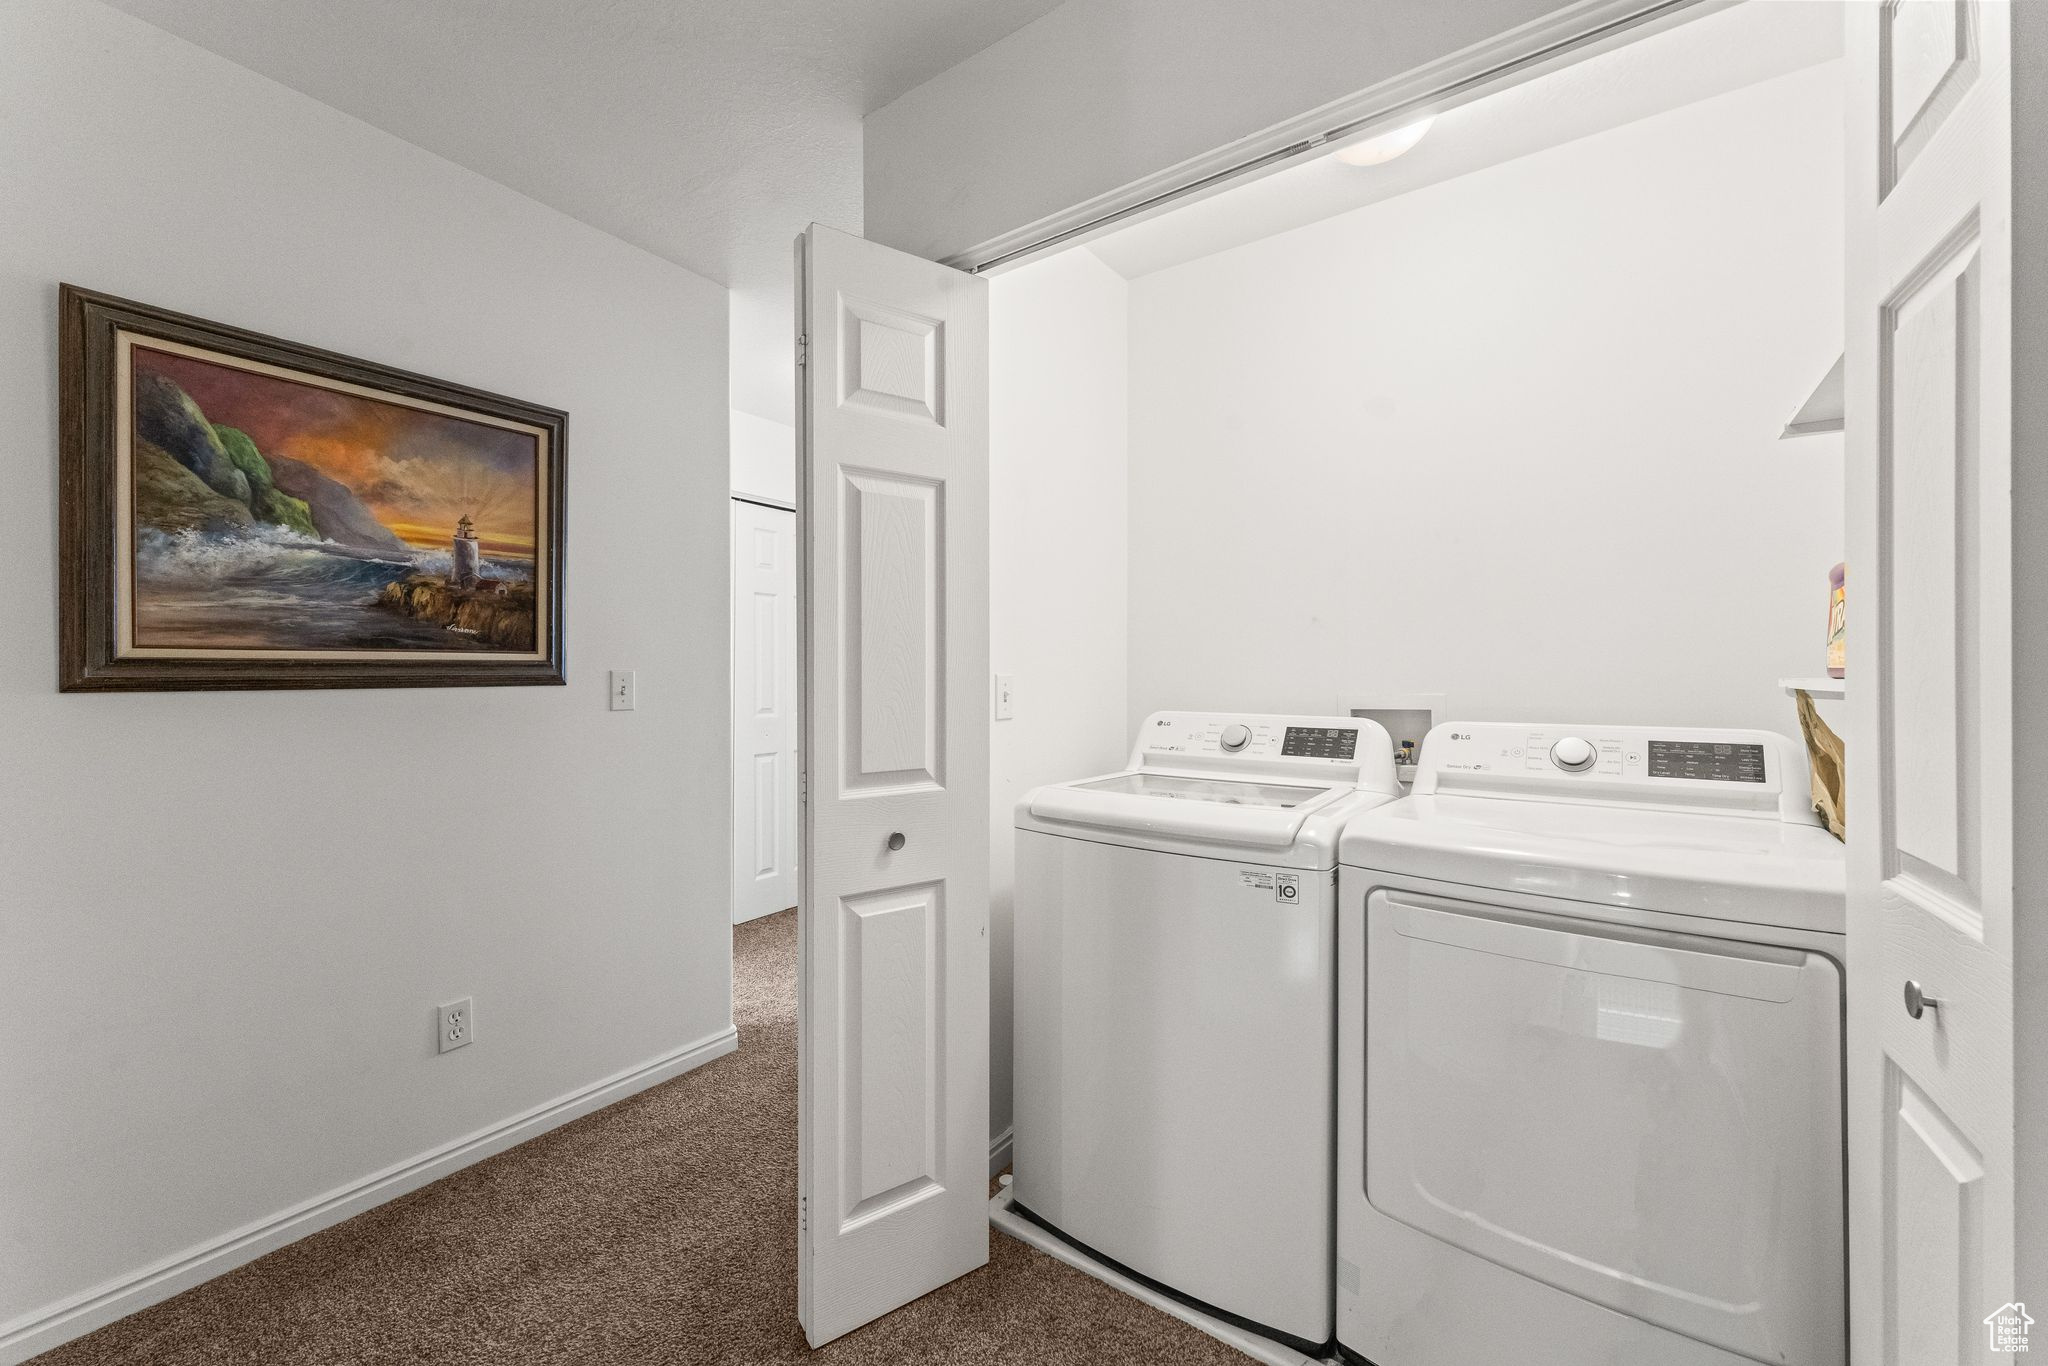 Laundry area with independent washer and dryer and dark carpet